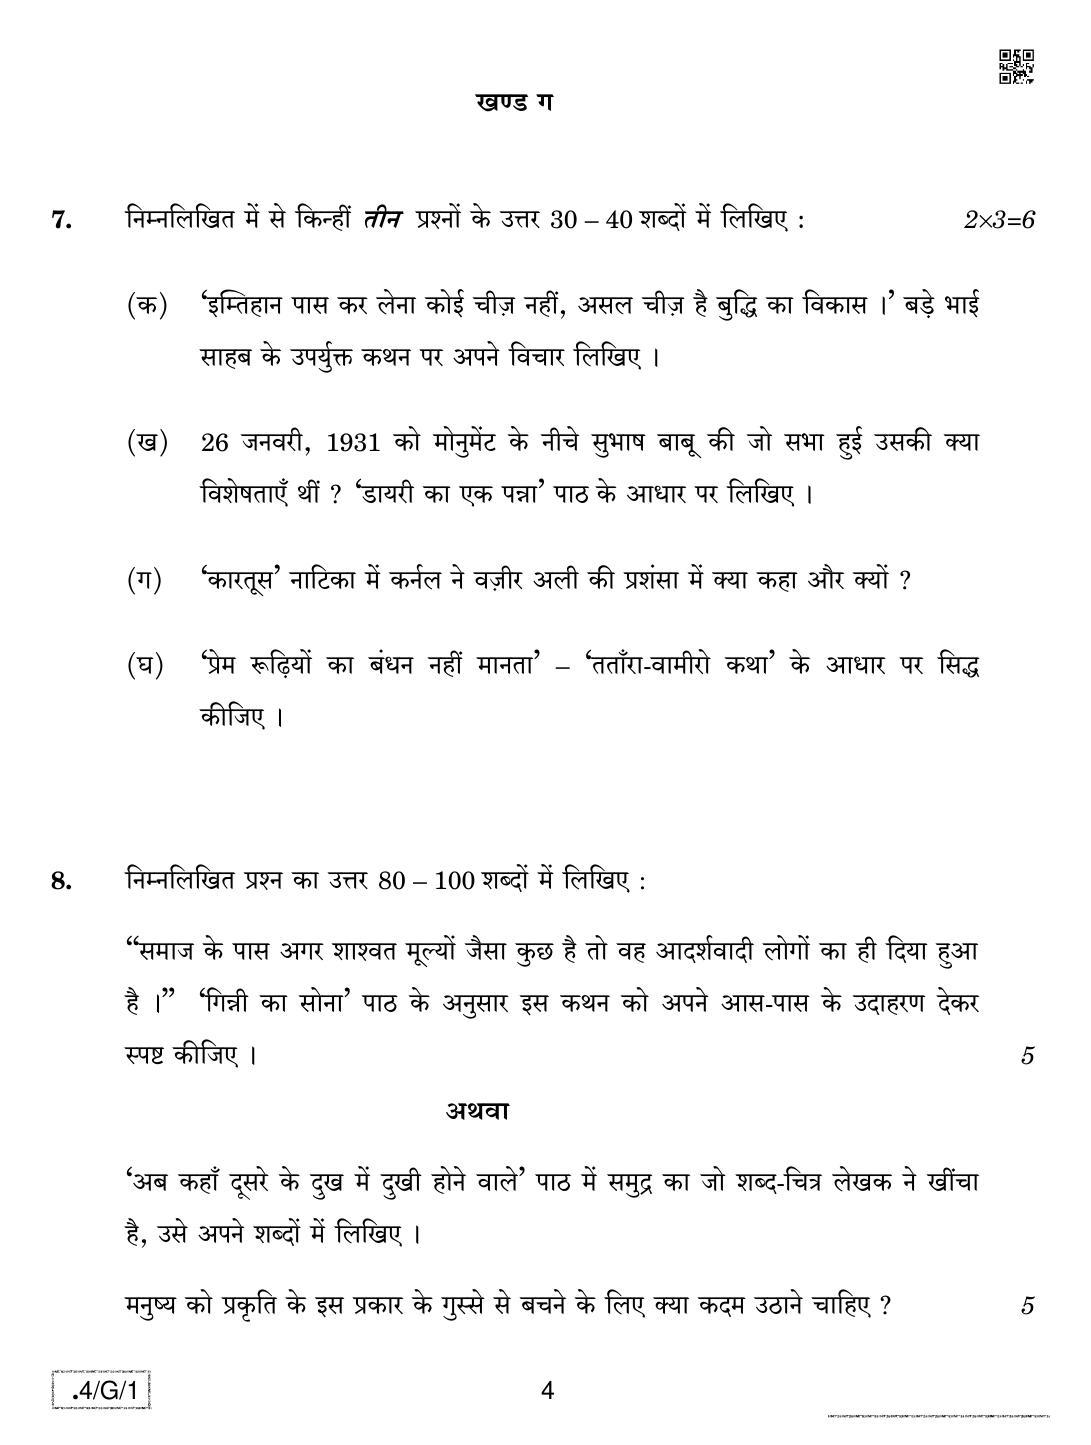 CBSE Class 10 4-C-1 Hindi B 2020 Compartment Question Paper - Page 4